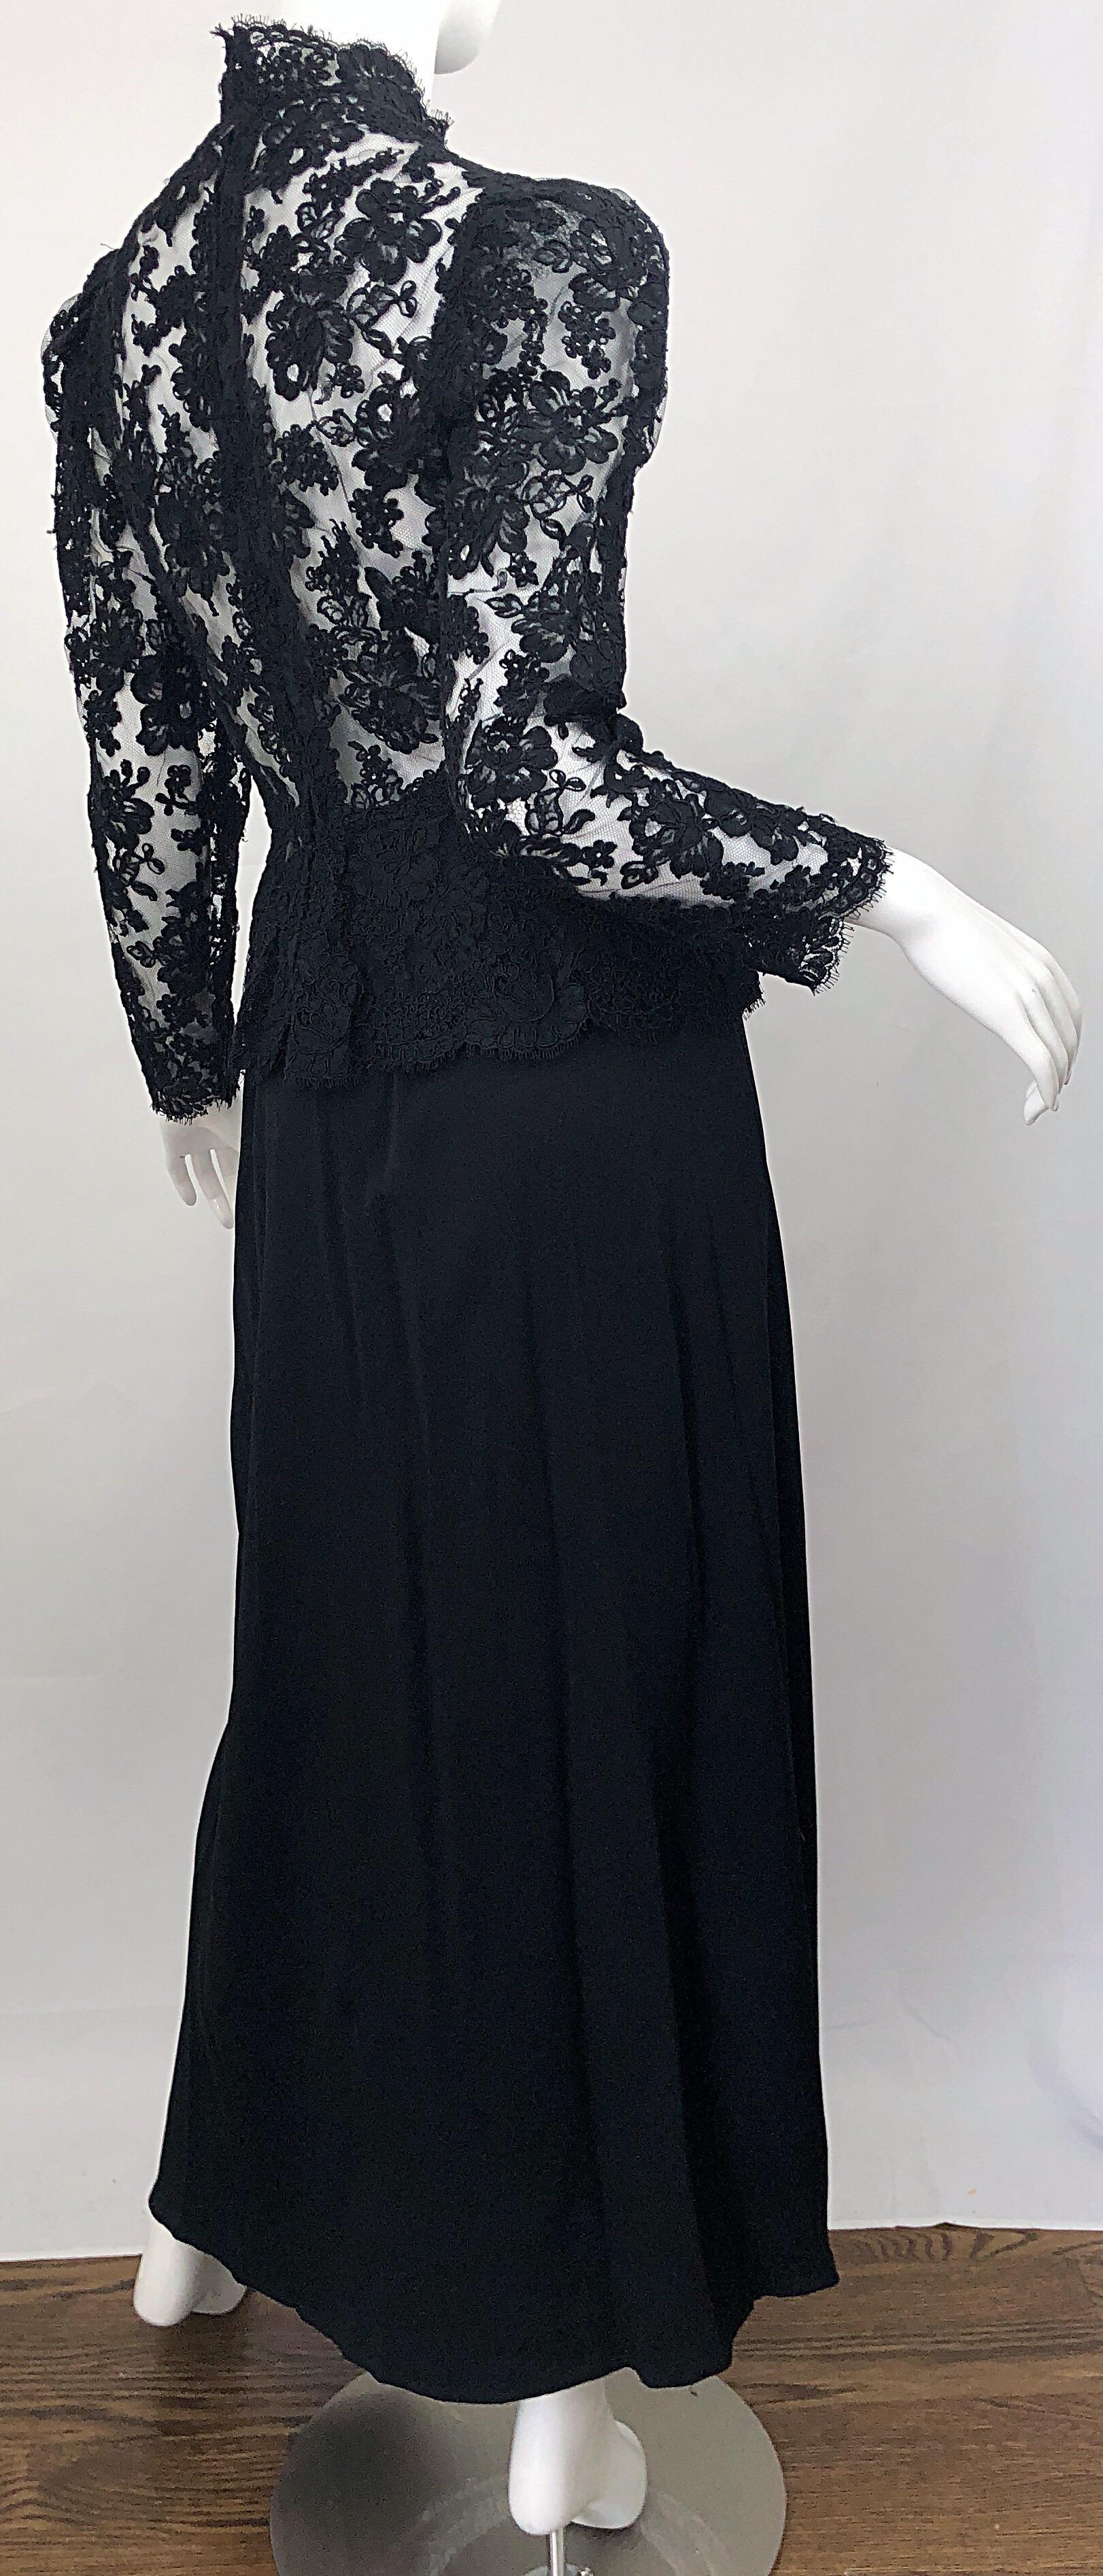 Vintage Vicky Tiel Couture 1980s Black Lace Victorian Top ...